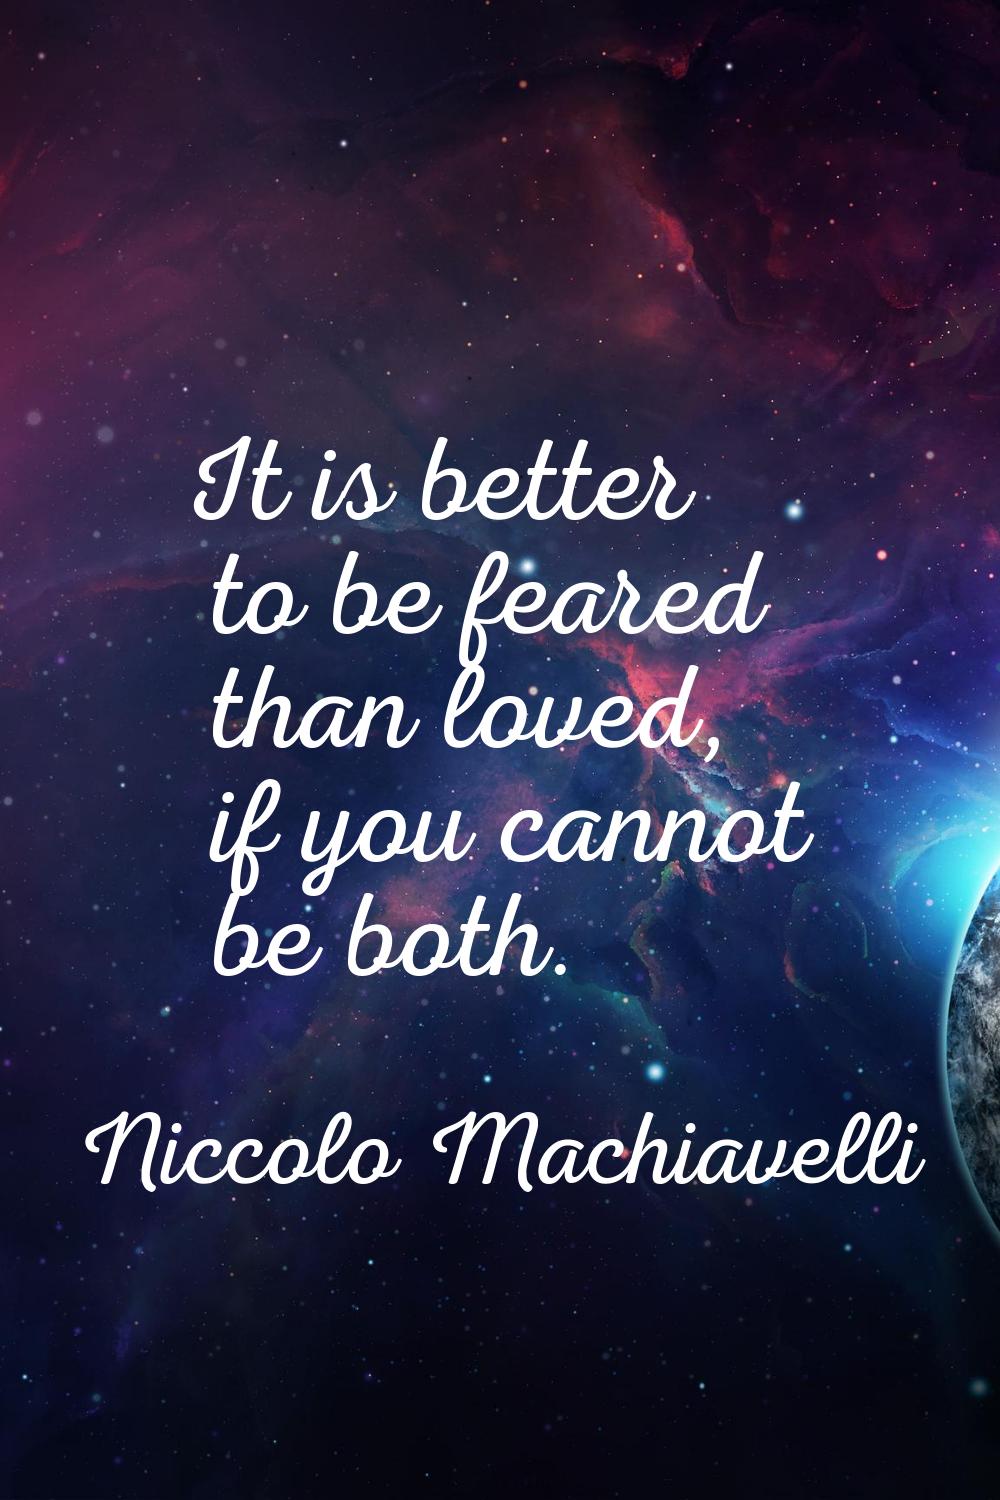 It is better to be feared than loved, if you cannot be both.